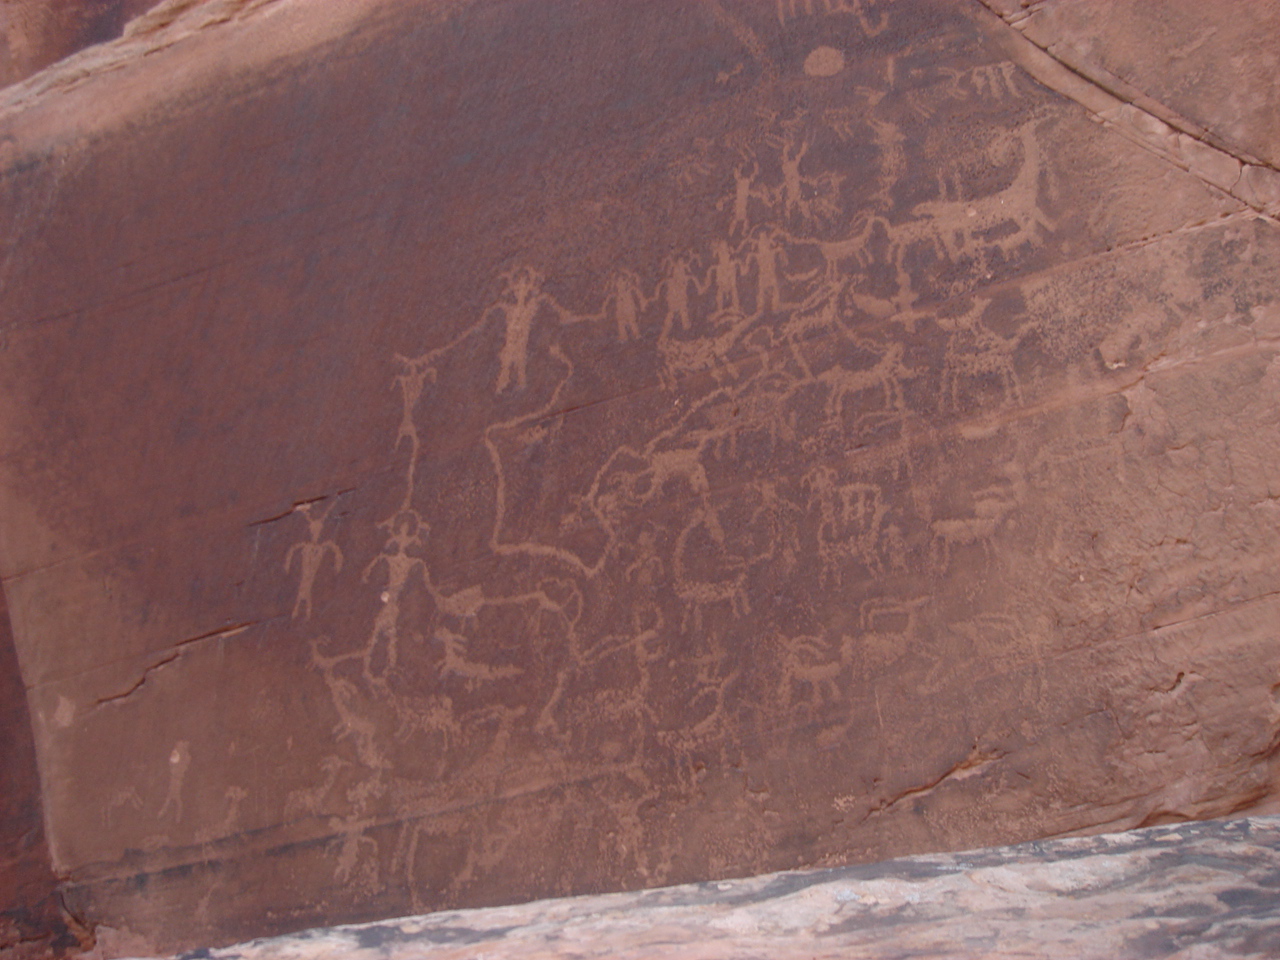 petroglyphs! thousands of years-old messages from The People